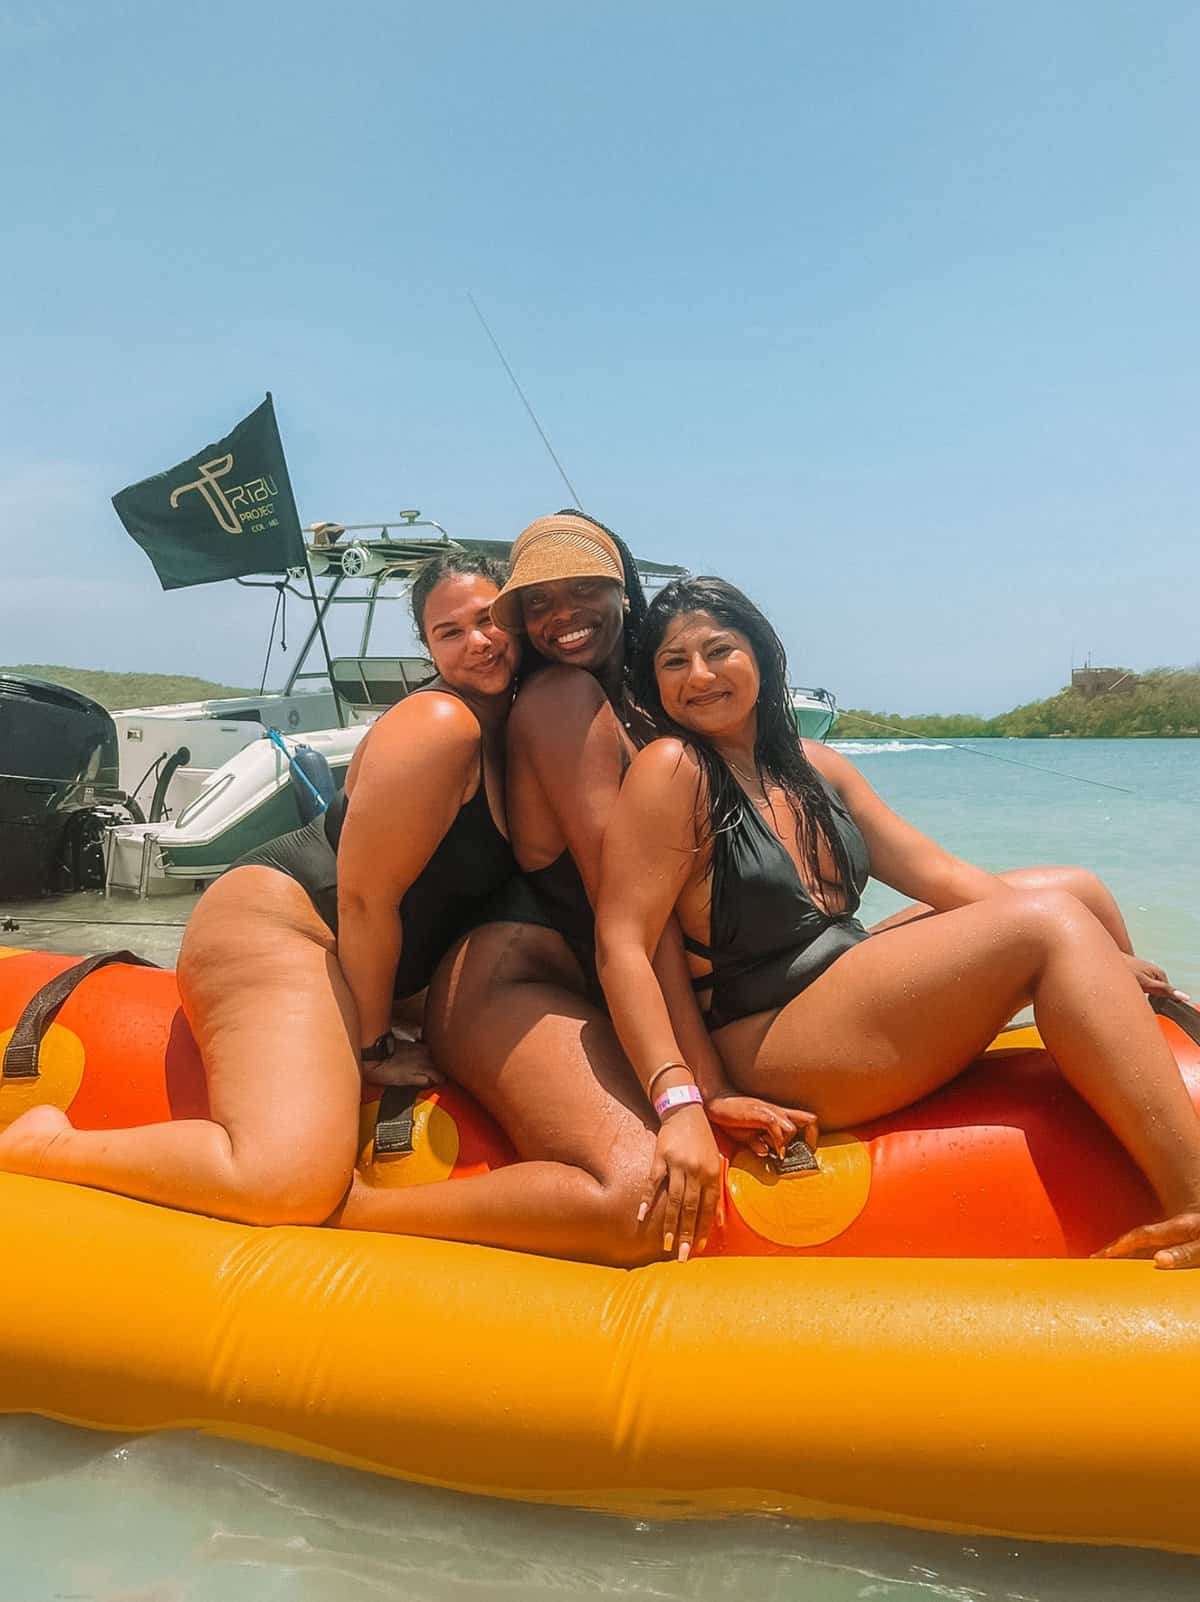 My friends smiling on a banana boat at Cholon Island during our island tour—which is one of the best things to do in Cartagena.